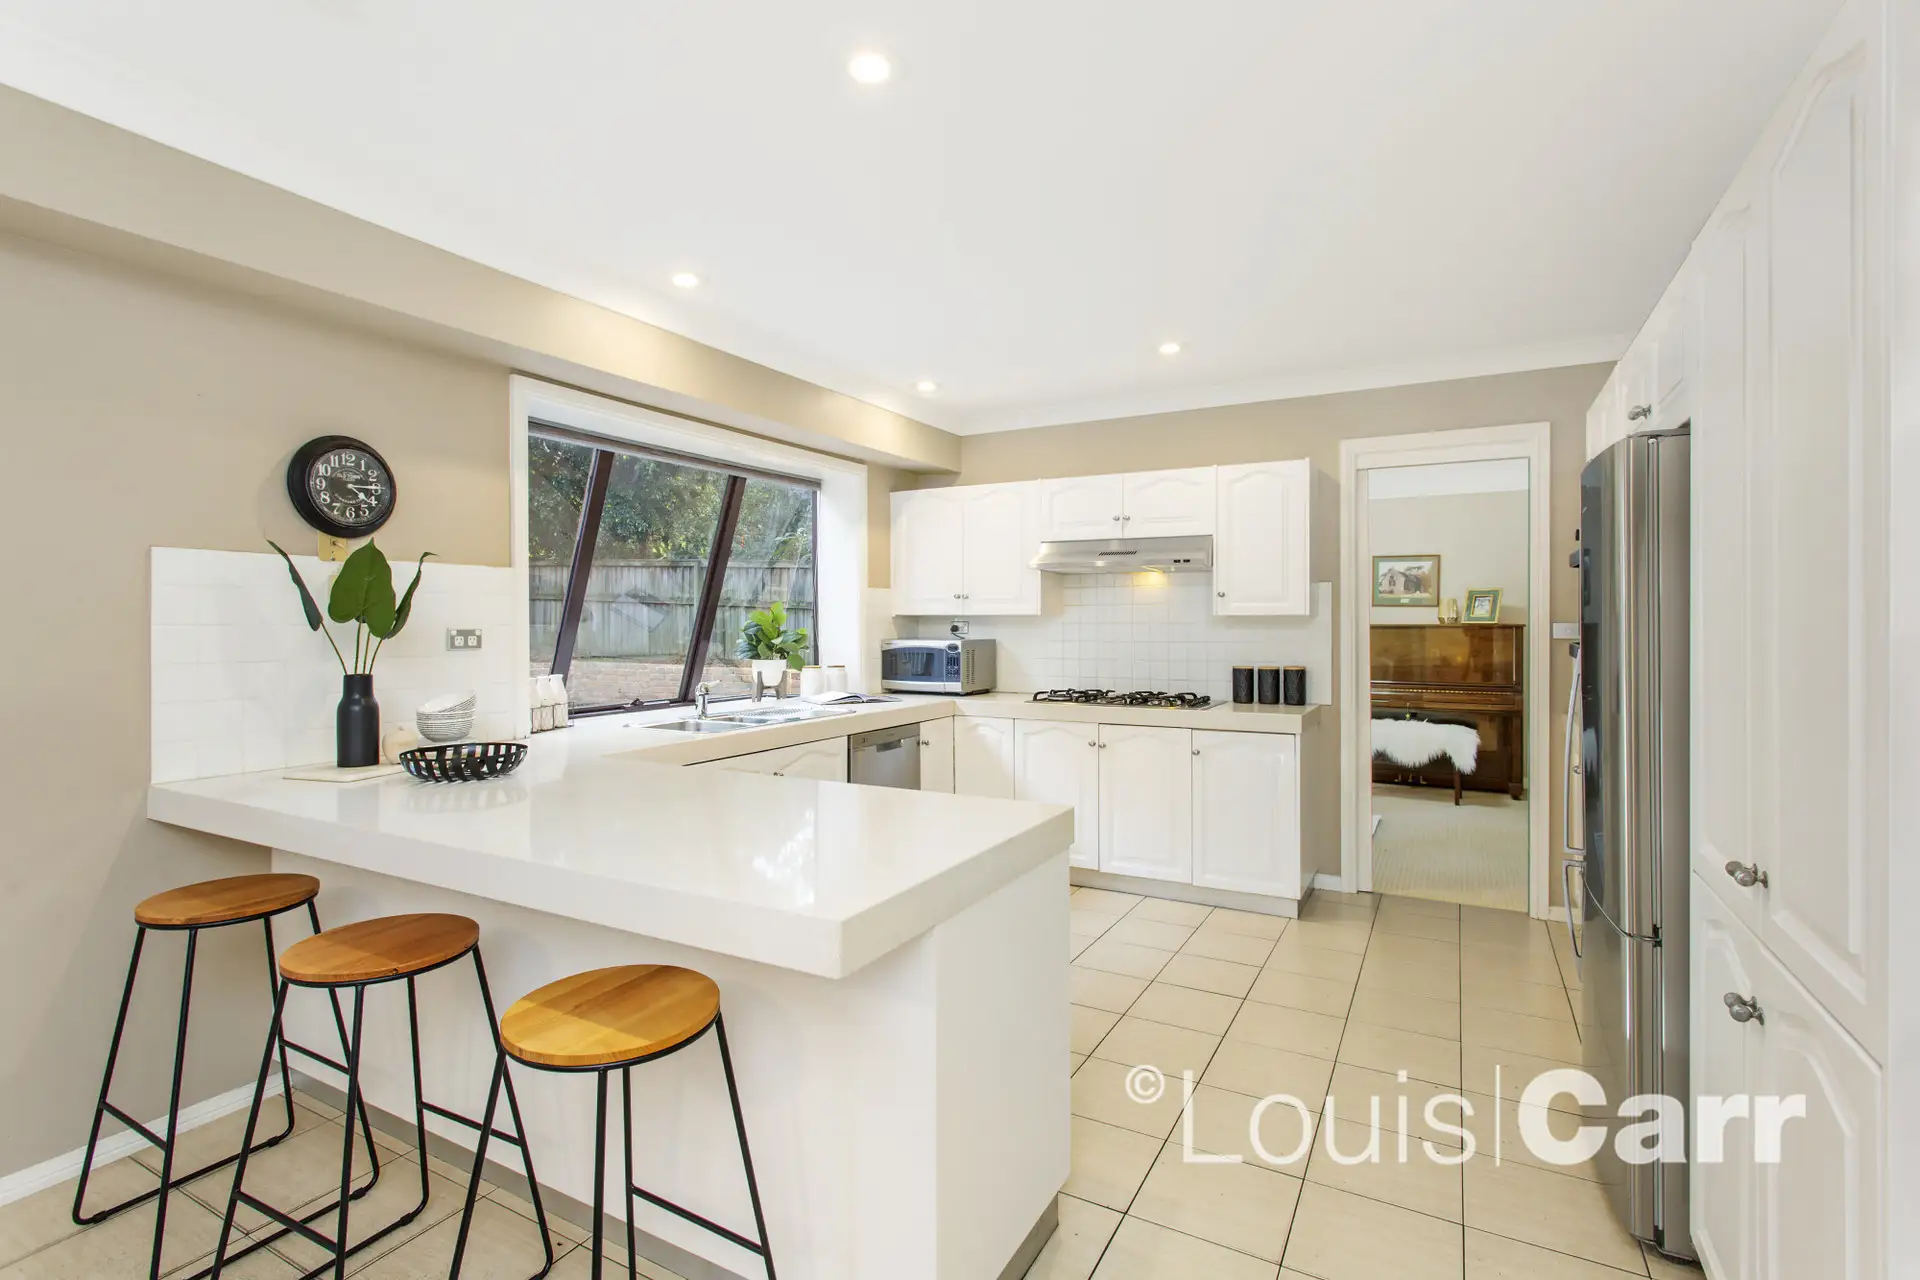 Photo #3: 13 Sanctuary Point Road, West Pennant Hills - Sold by Louis Carr Real Estate